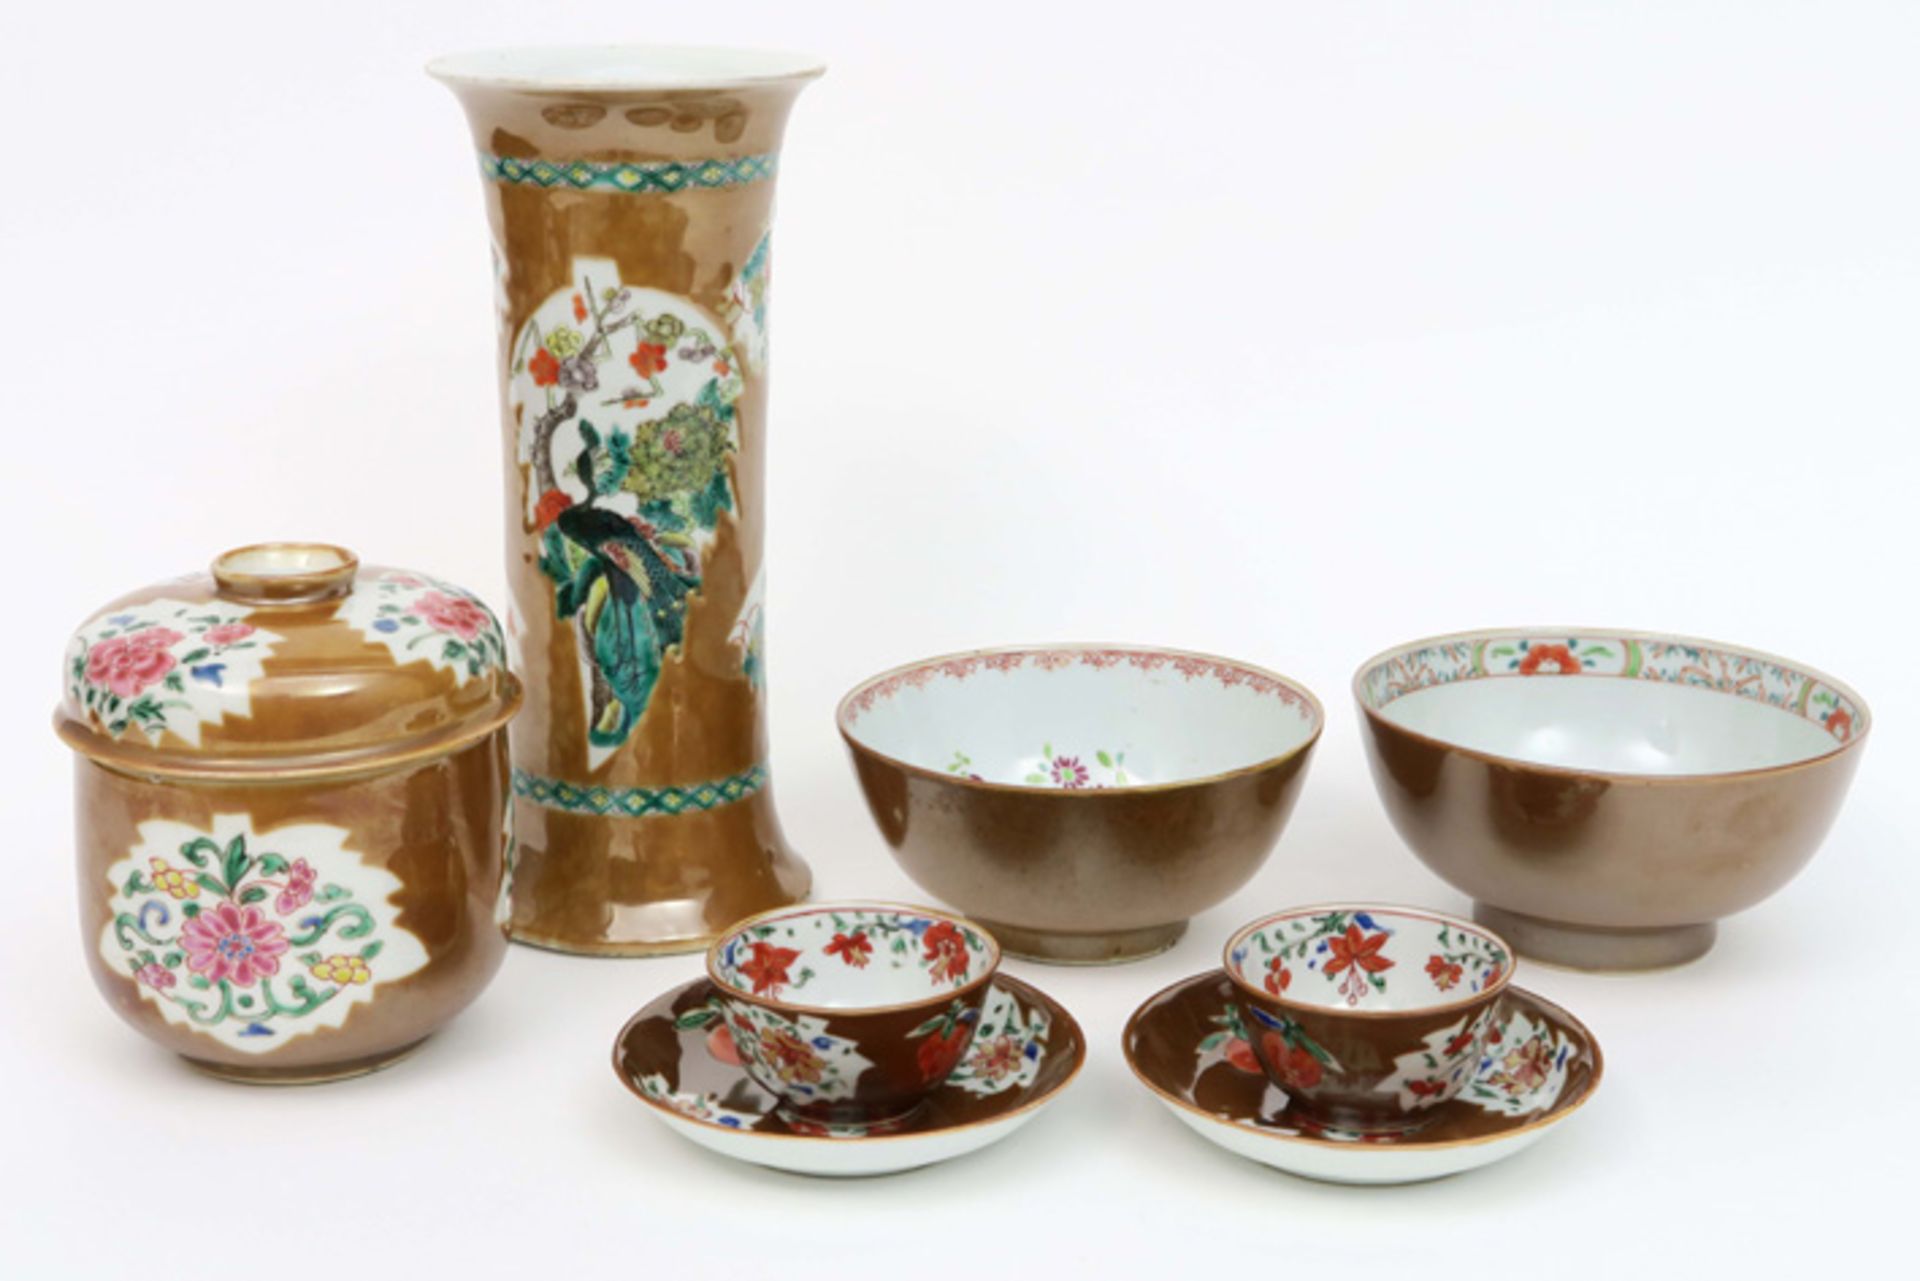 eight 18th Cent. Chinese items in "café au lait" porcelain : lidded pot, two sets of cup and